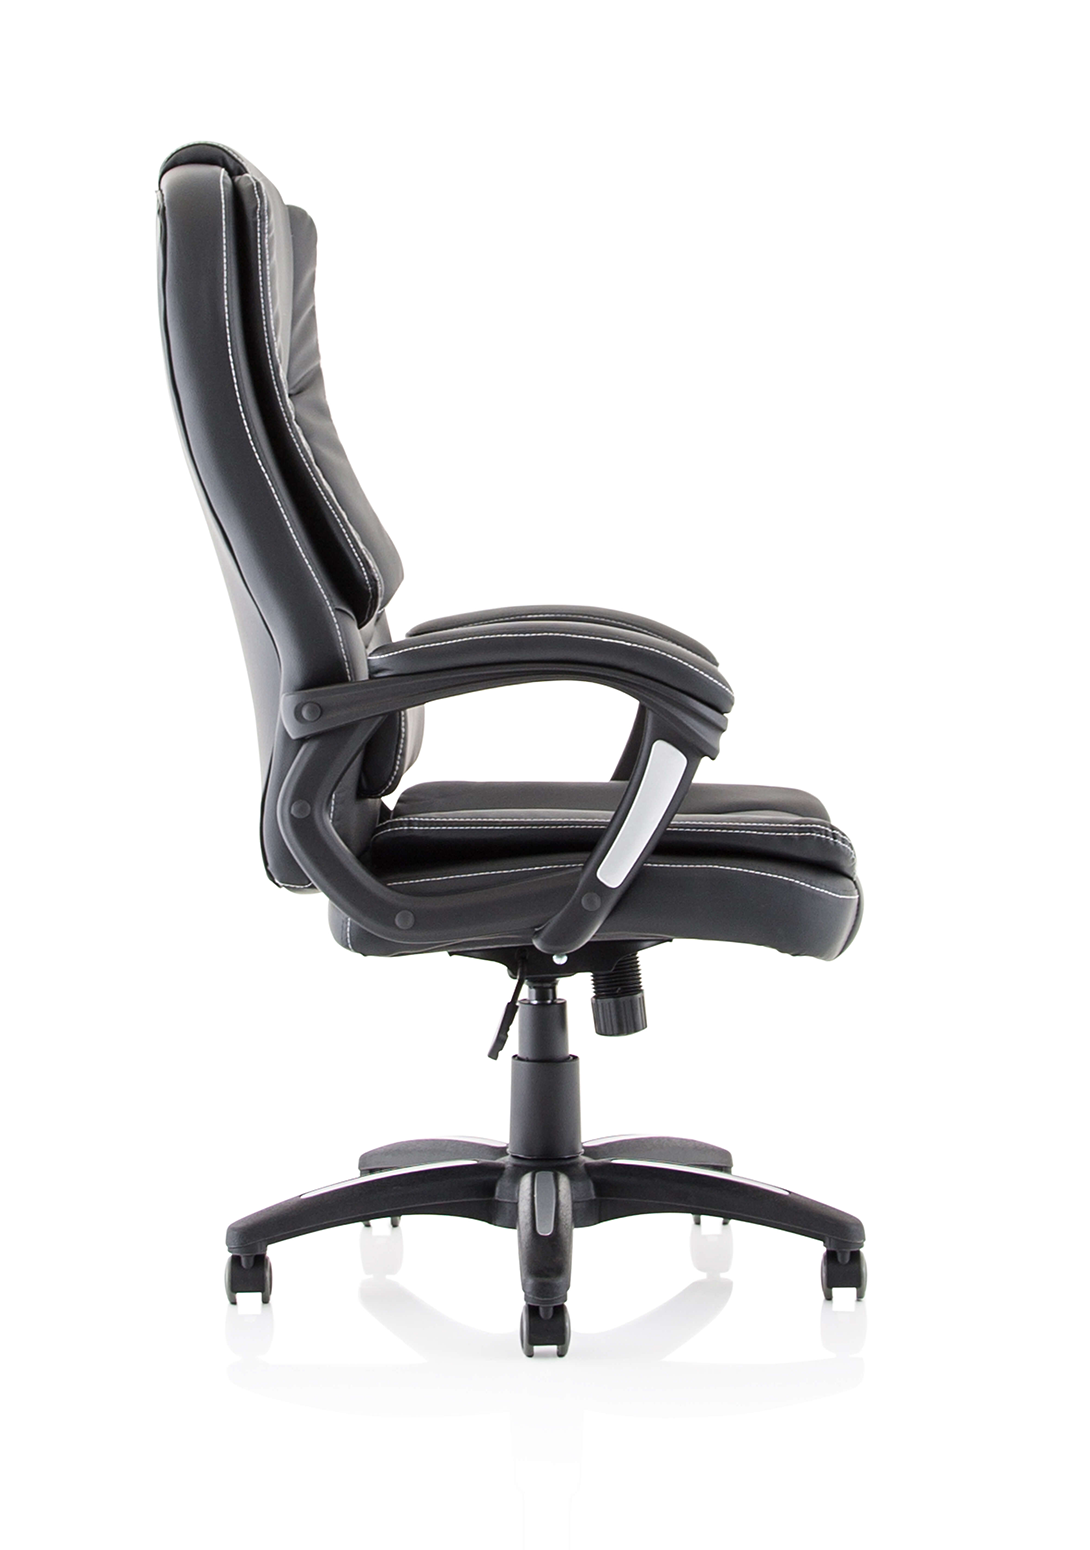 Dakota High Back Black Leather Executive Office Chair with Arms